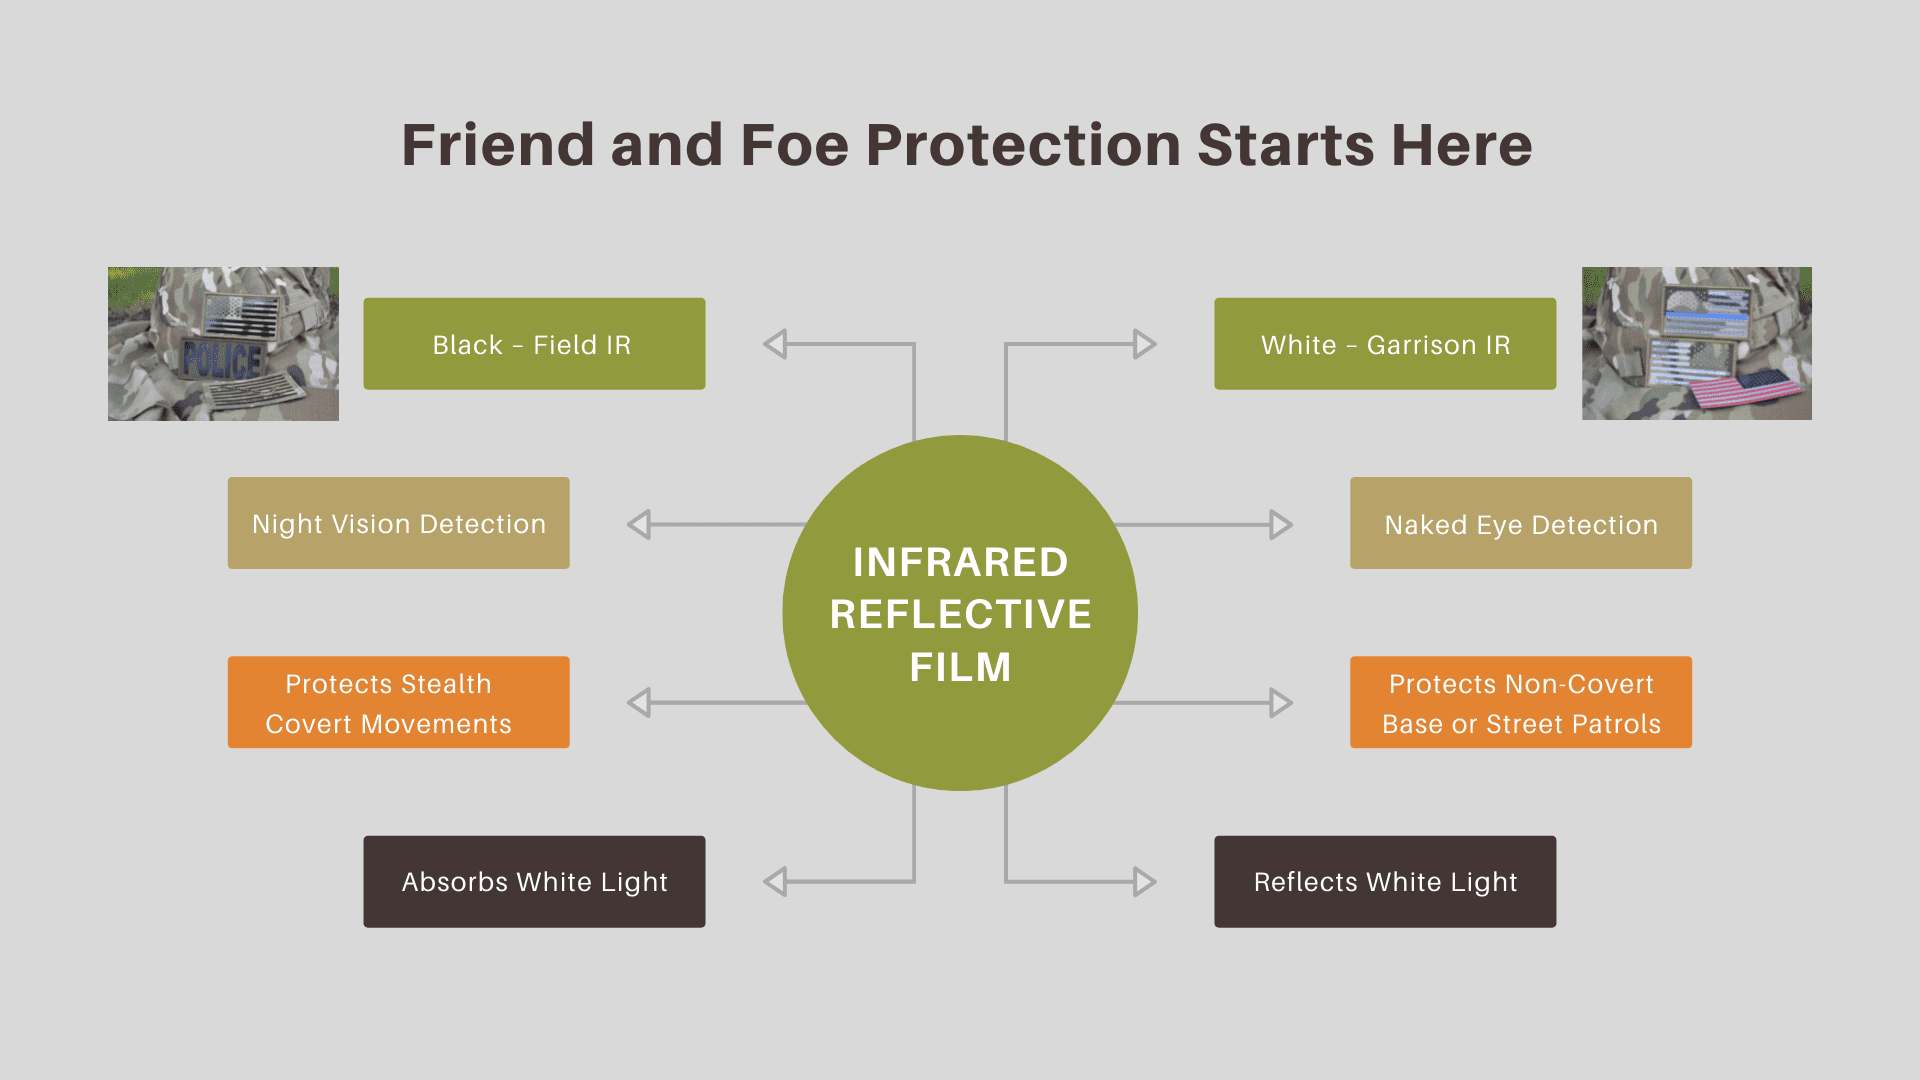 Chart shows how IR reflective film impacts IFF protection